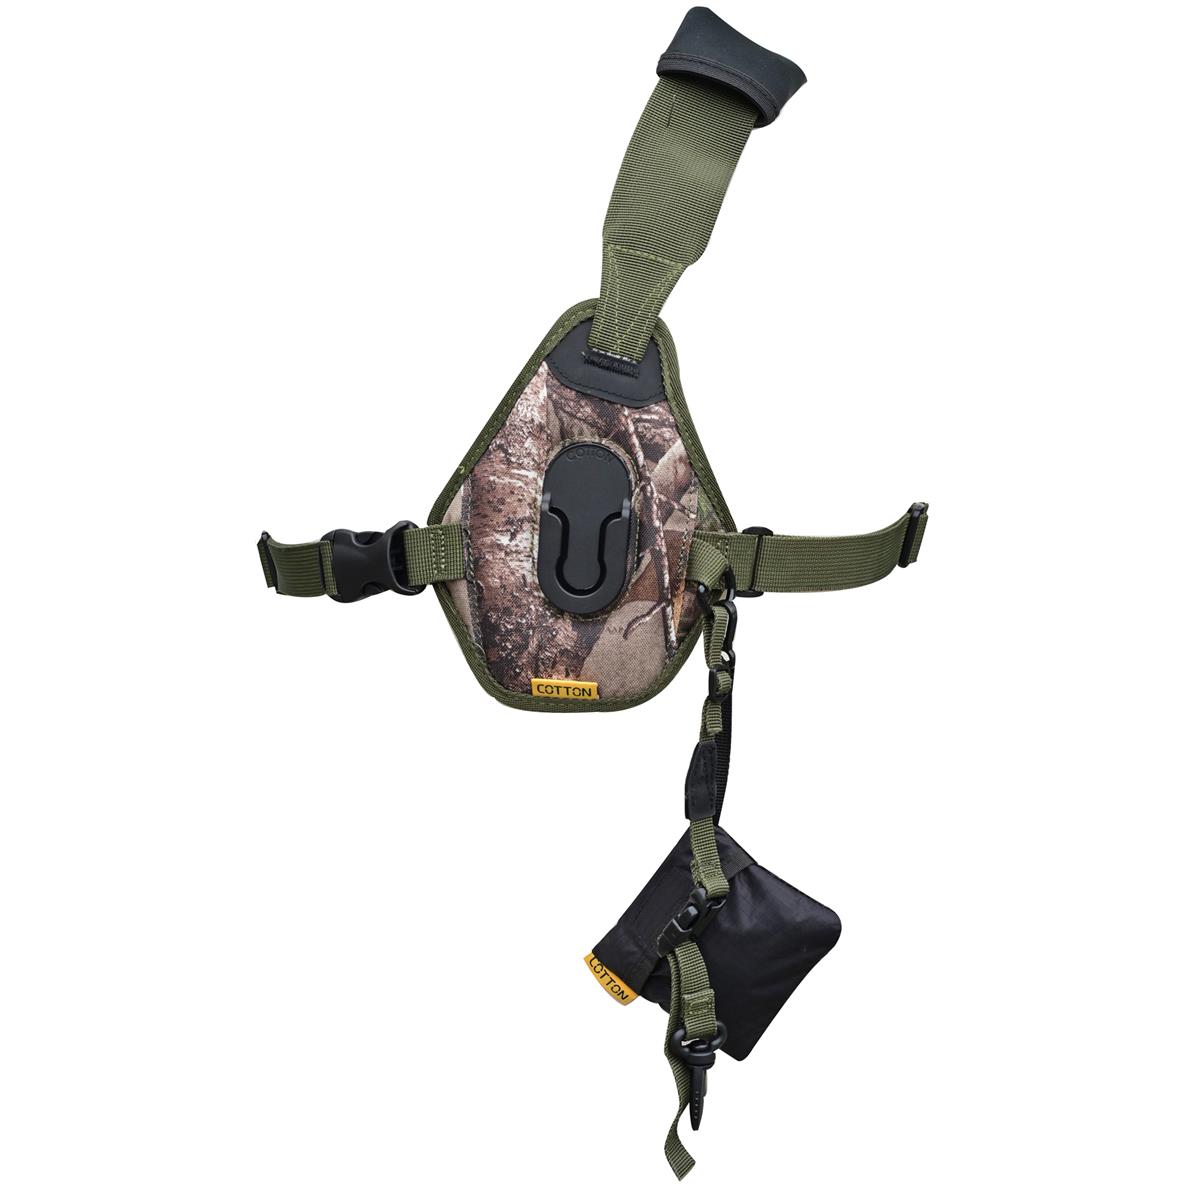 Image of Cotton Carrier SKOUT G2 Sling-Style Harness for Binoculars